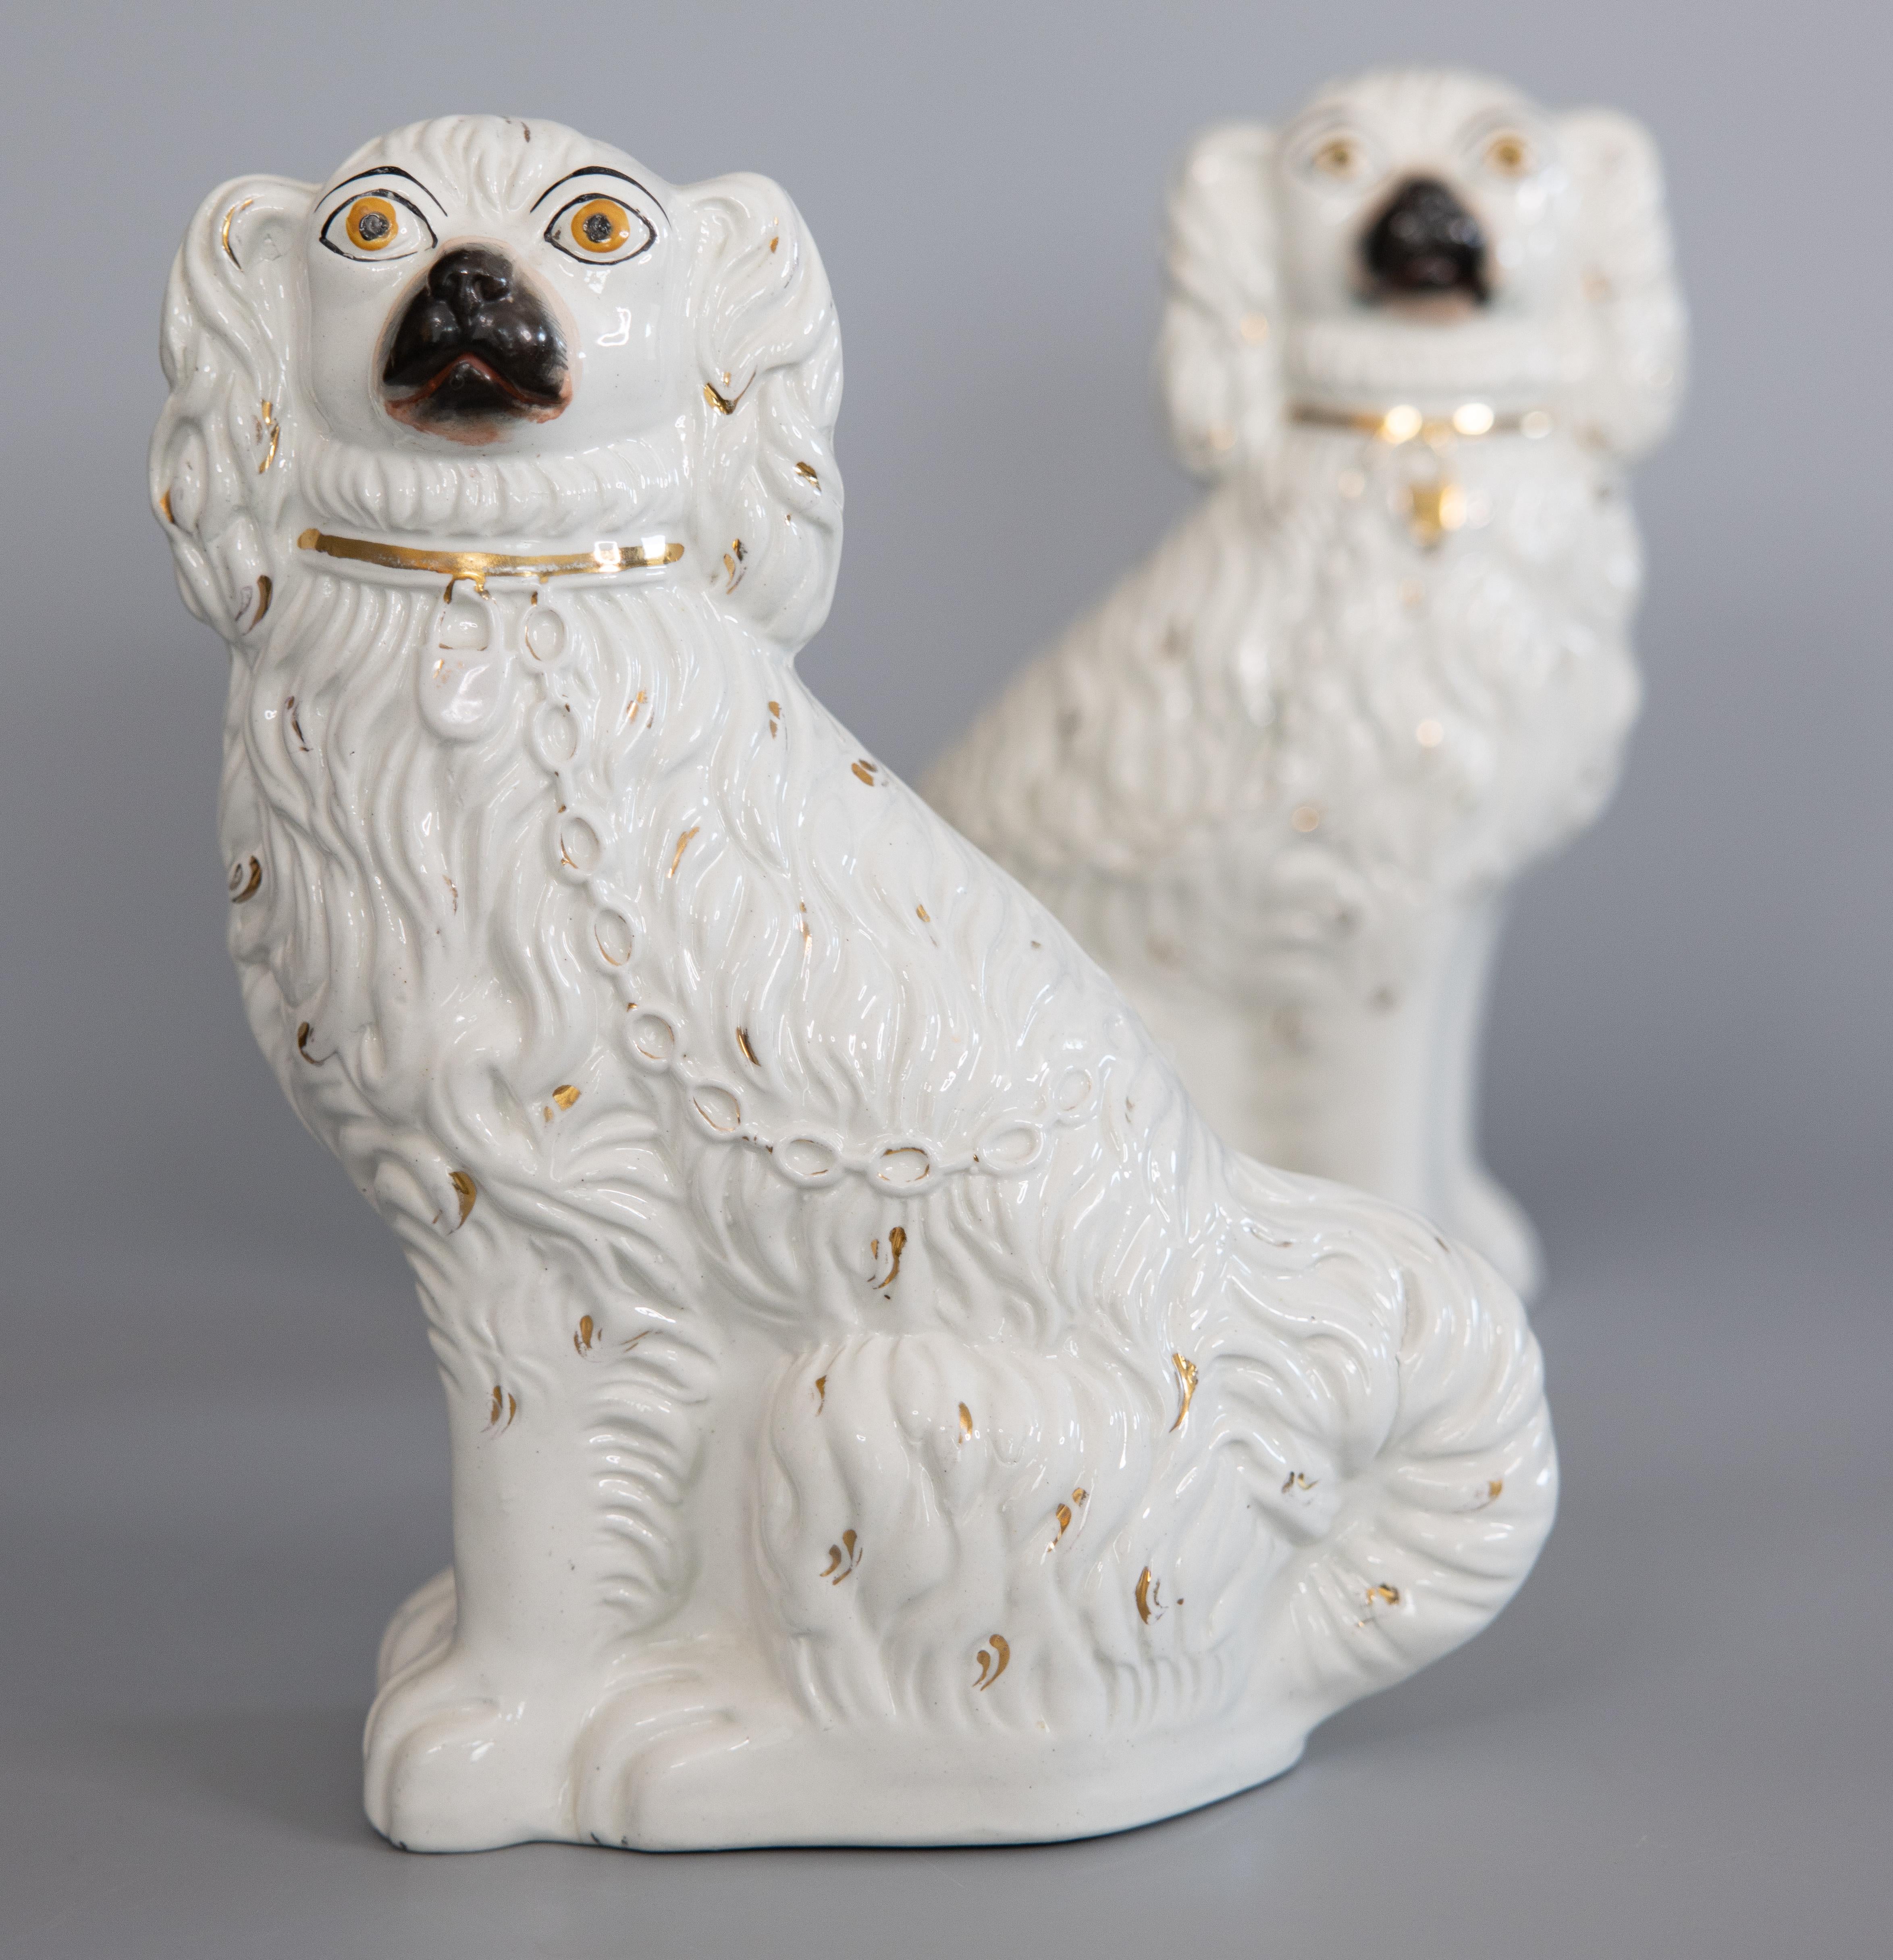 Hand-Painted Pair of 19th Century English Staffordshire Spaniel Dogs Figurines